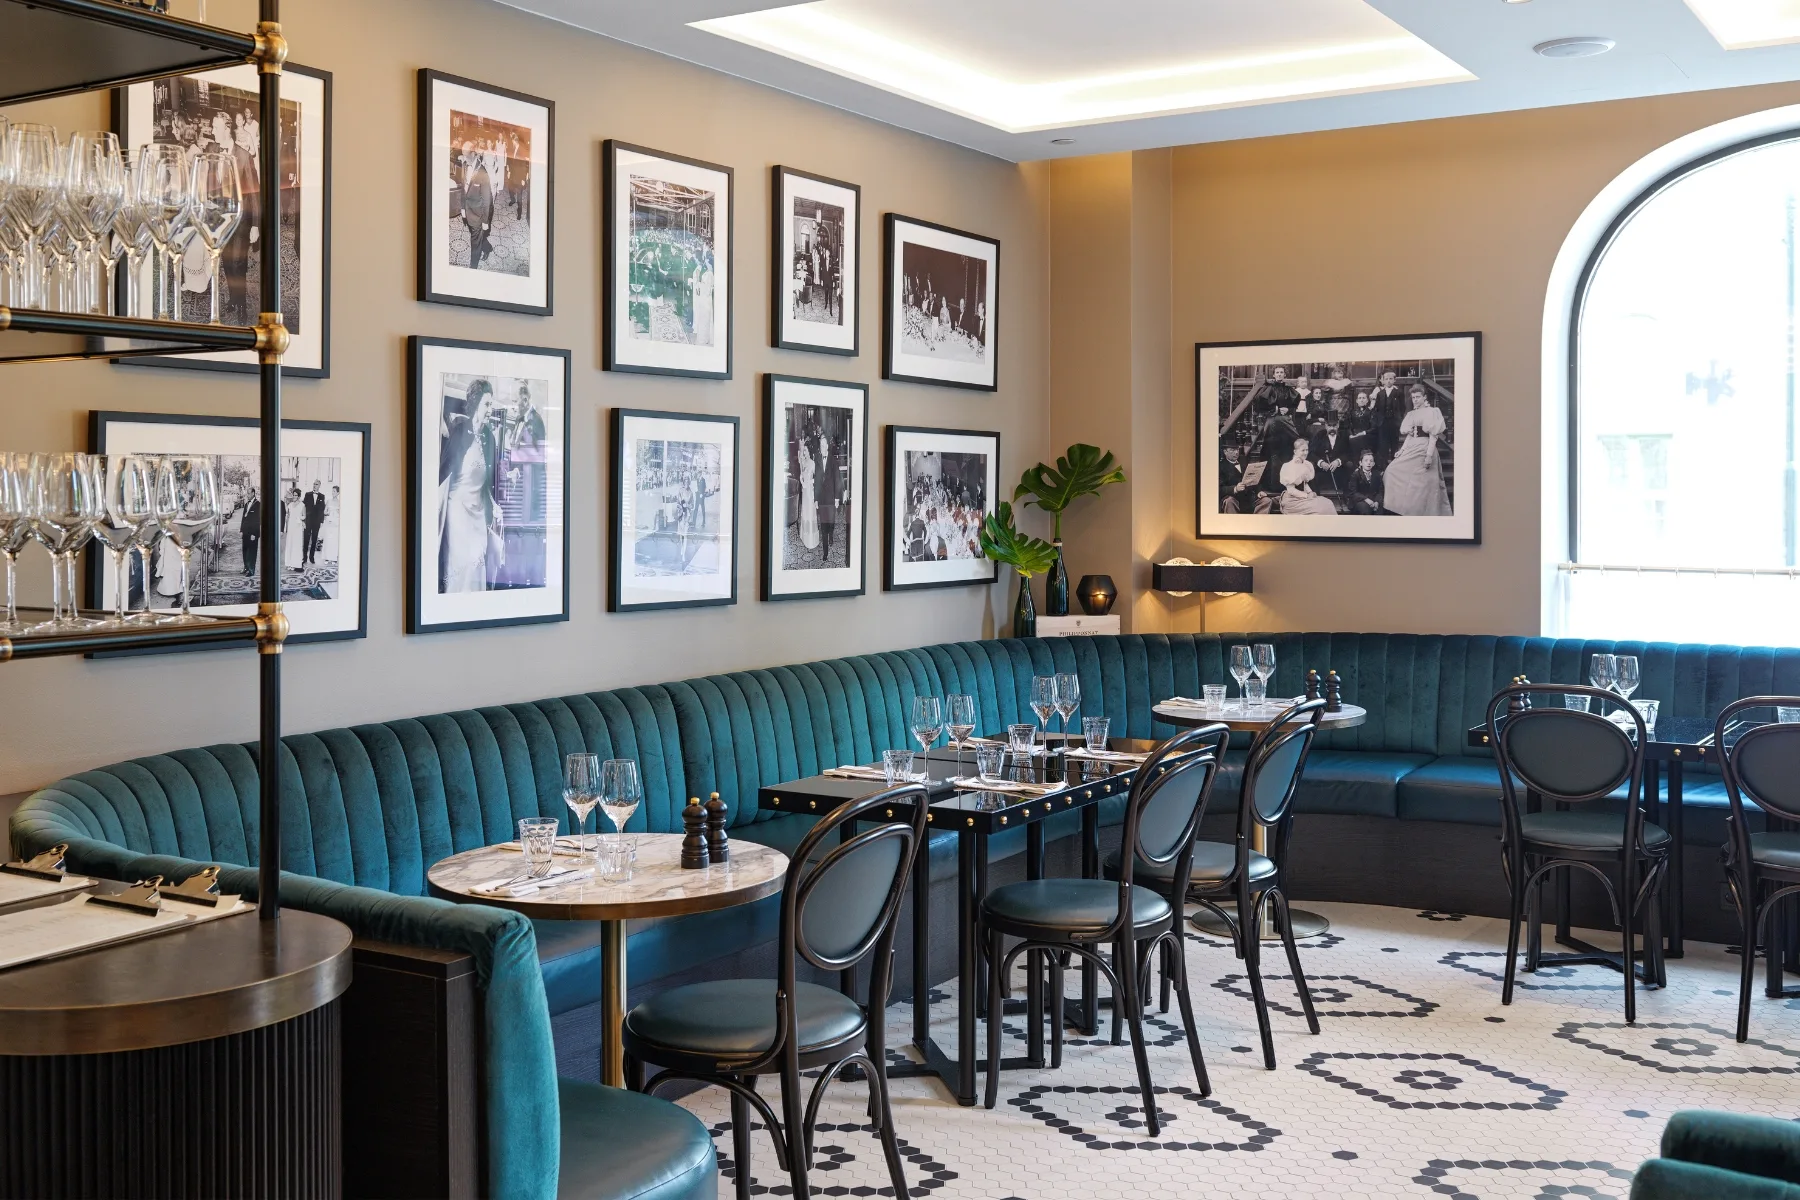 the restaurant interior features contract furniture with blue couches and framed pictures - contract furniture